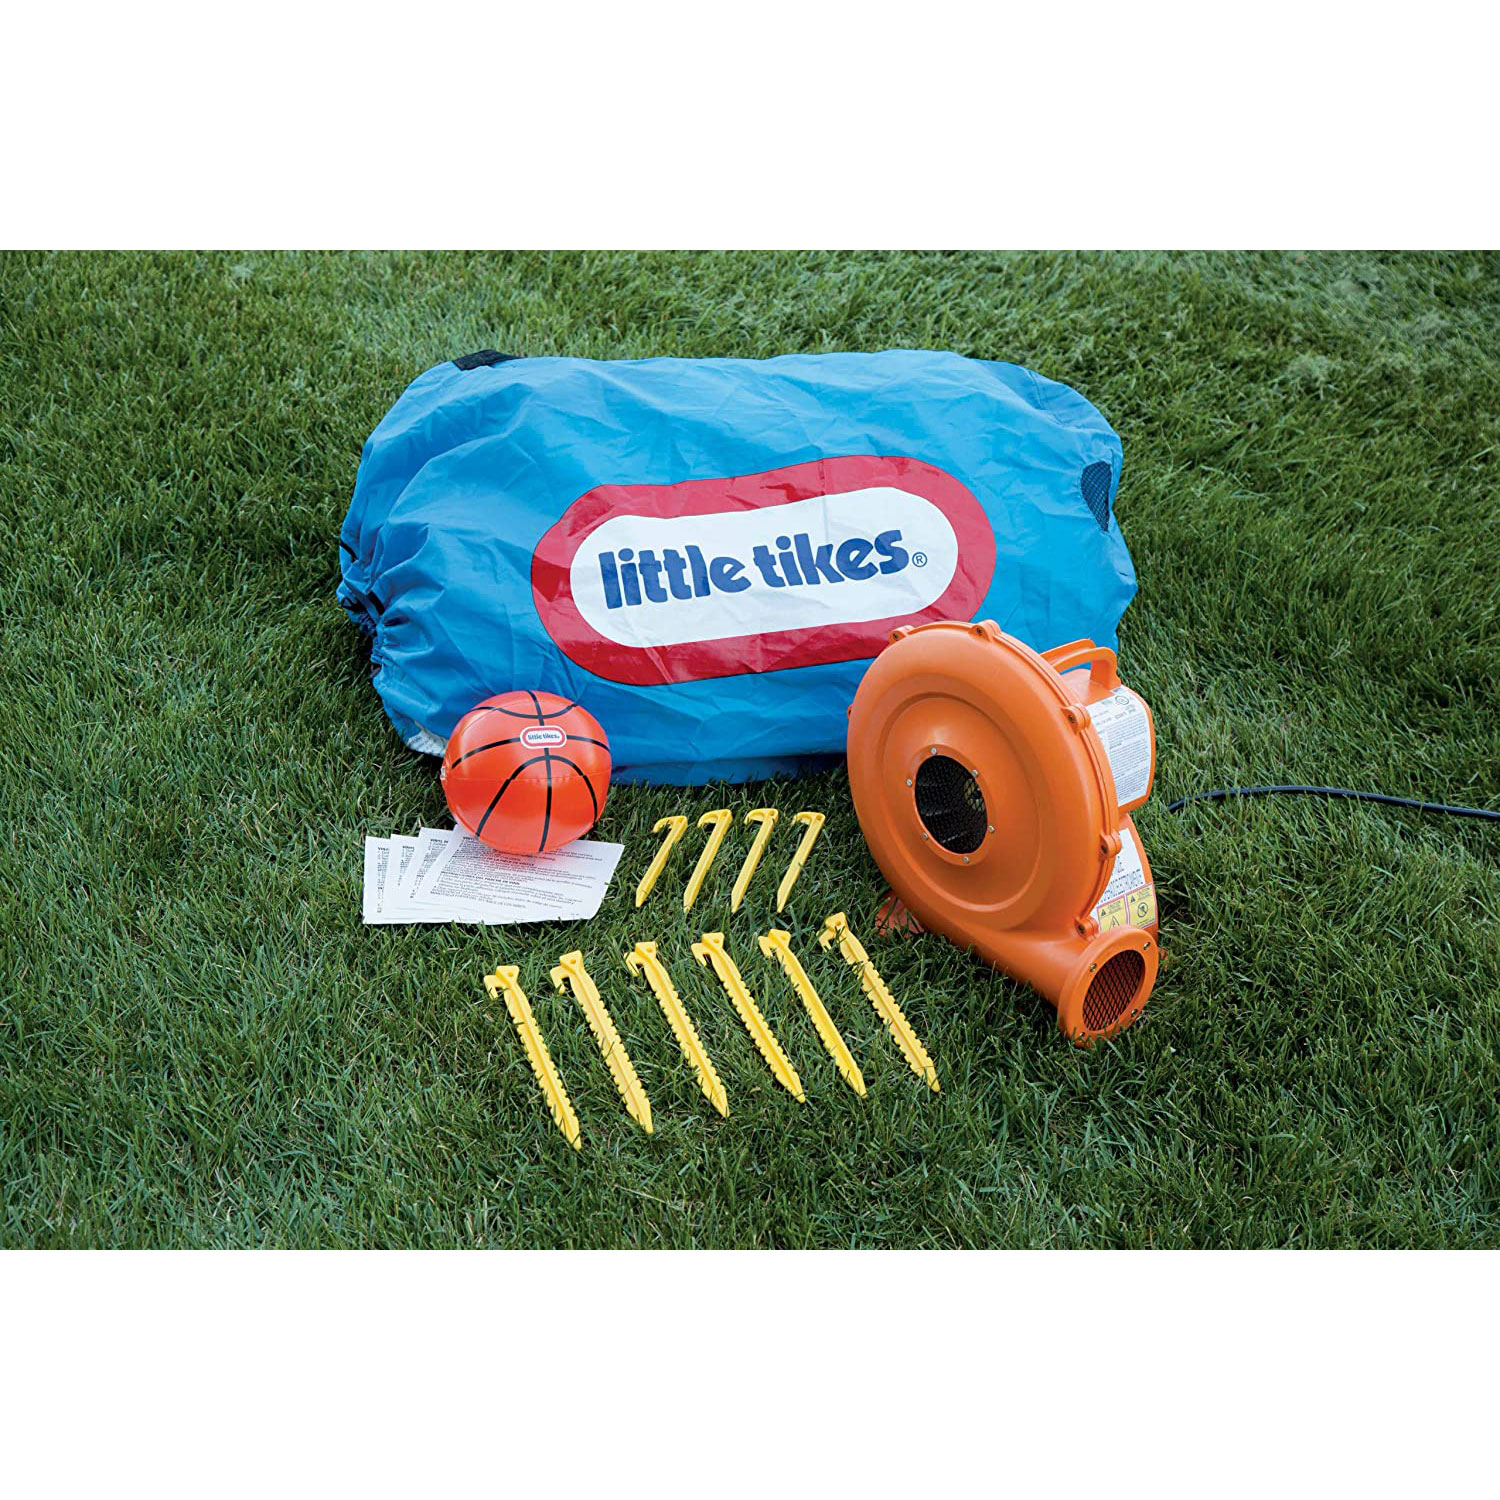 Little Tikes Junior Sports 'n Slide Inflatable Bounce House with ...